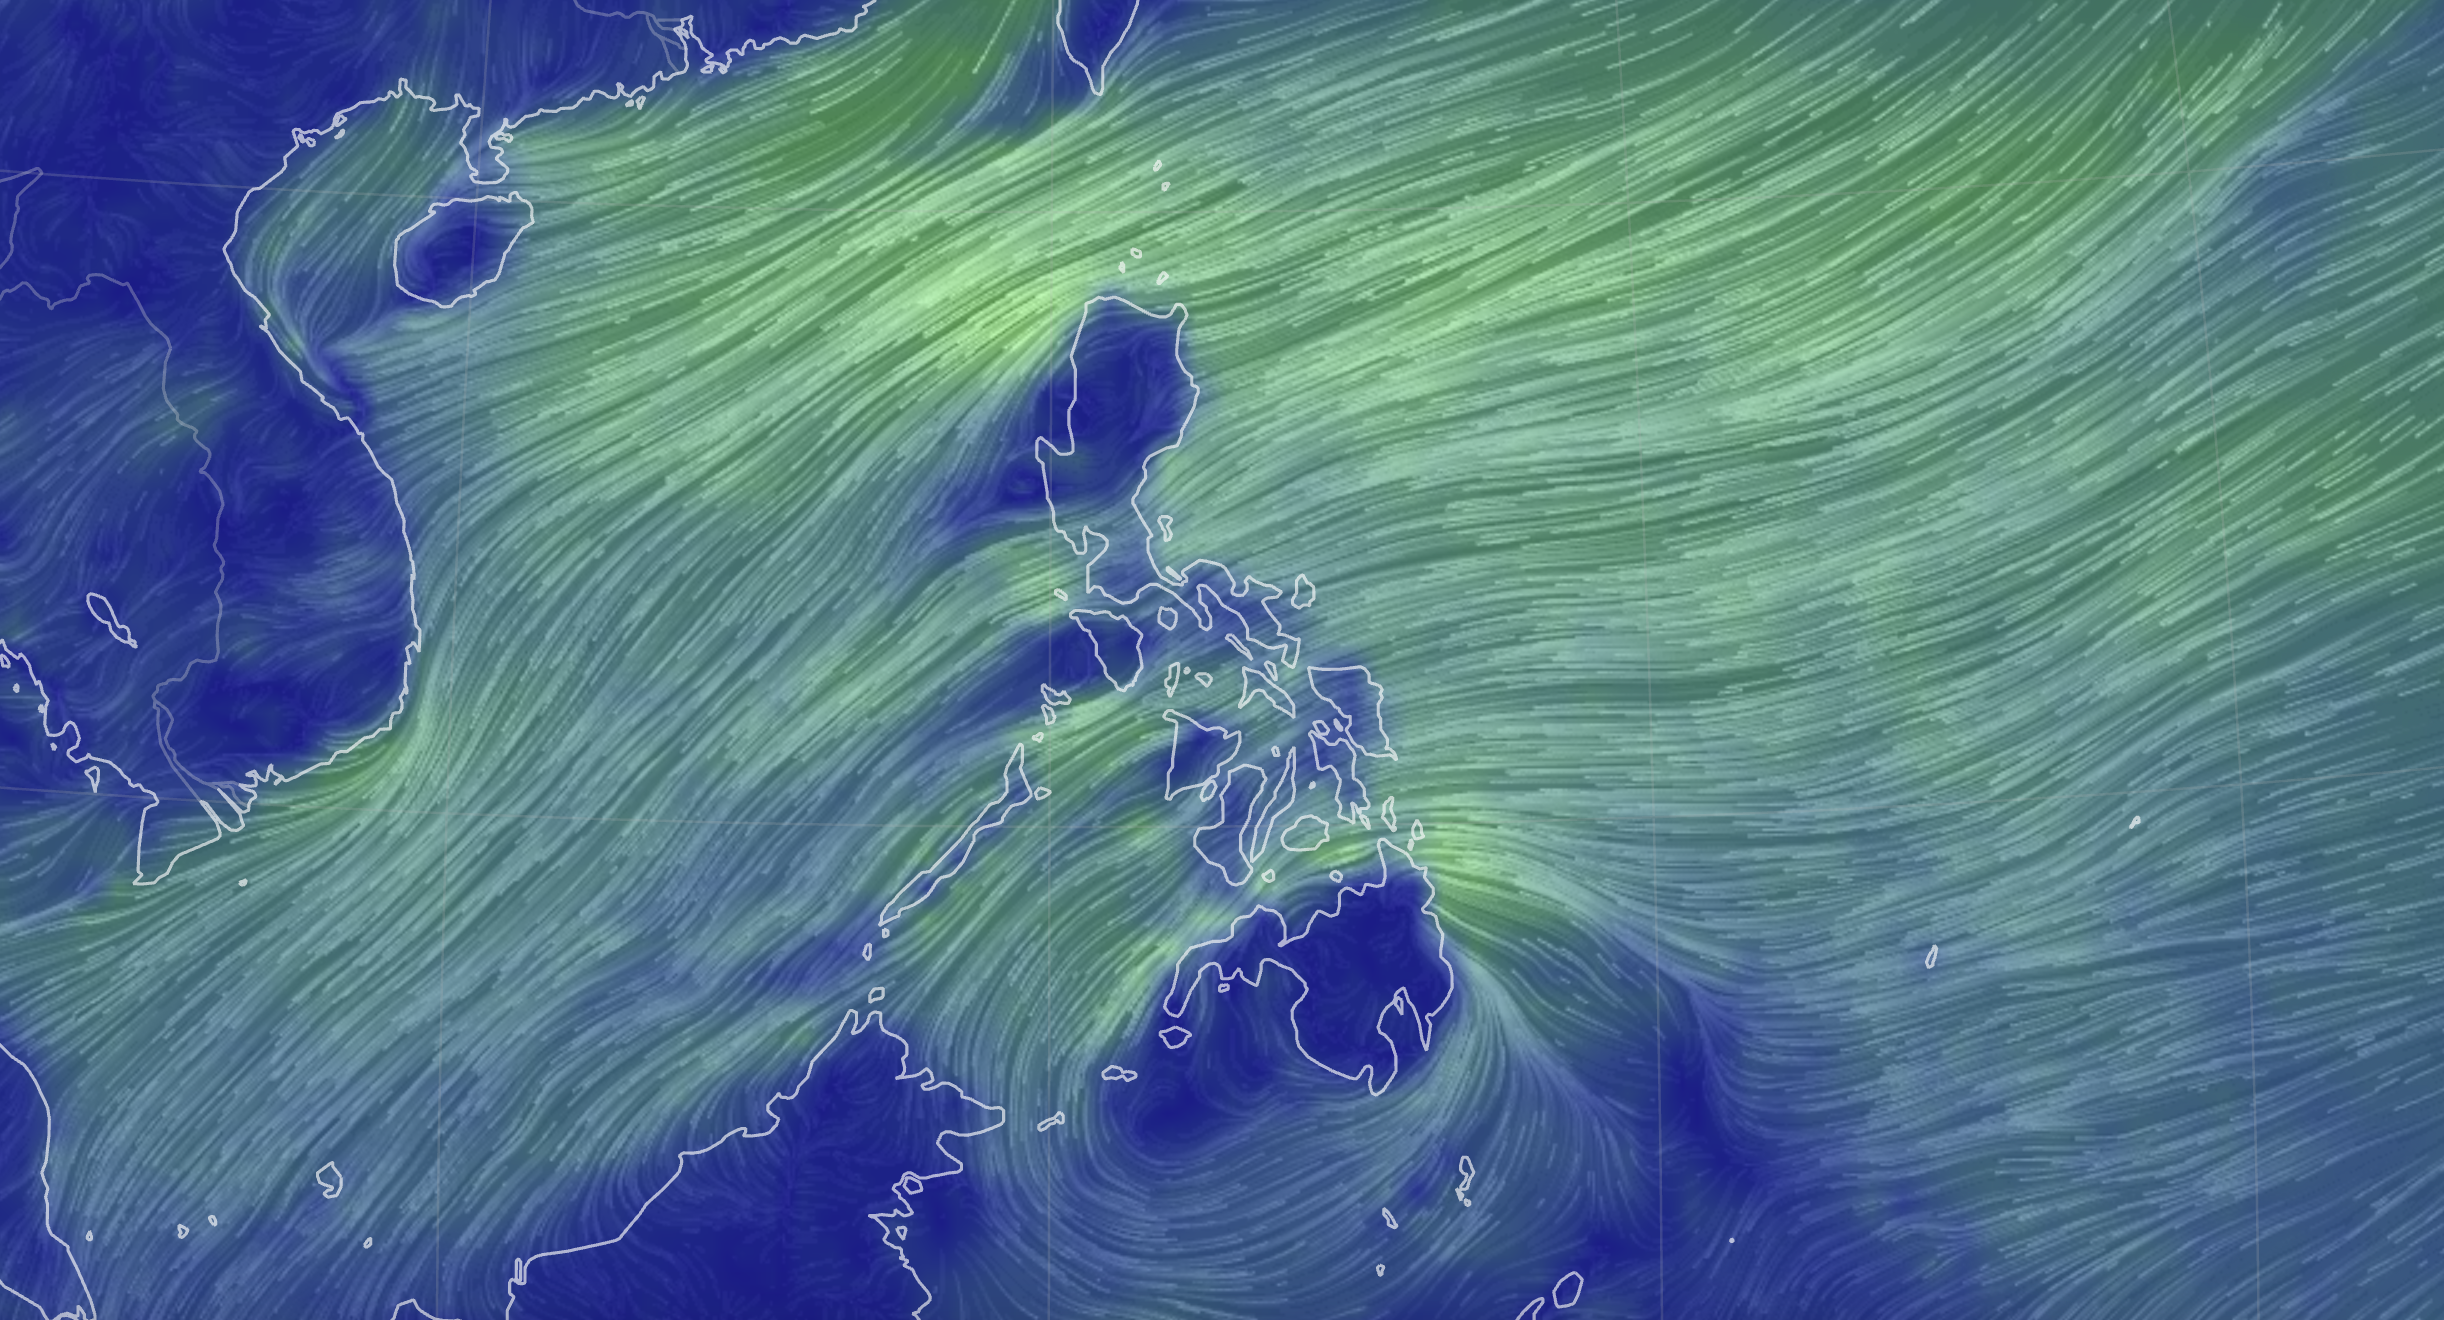 Pagasa says 'Lakas' is a fake super typhoon: It doesn't exist